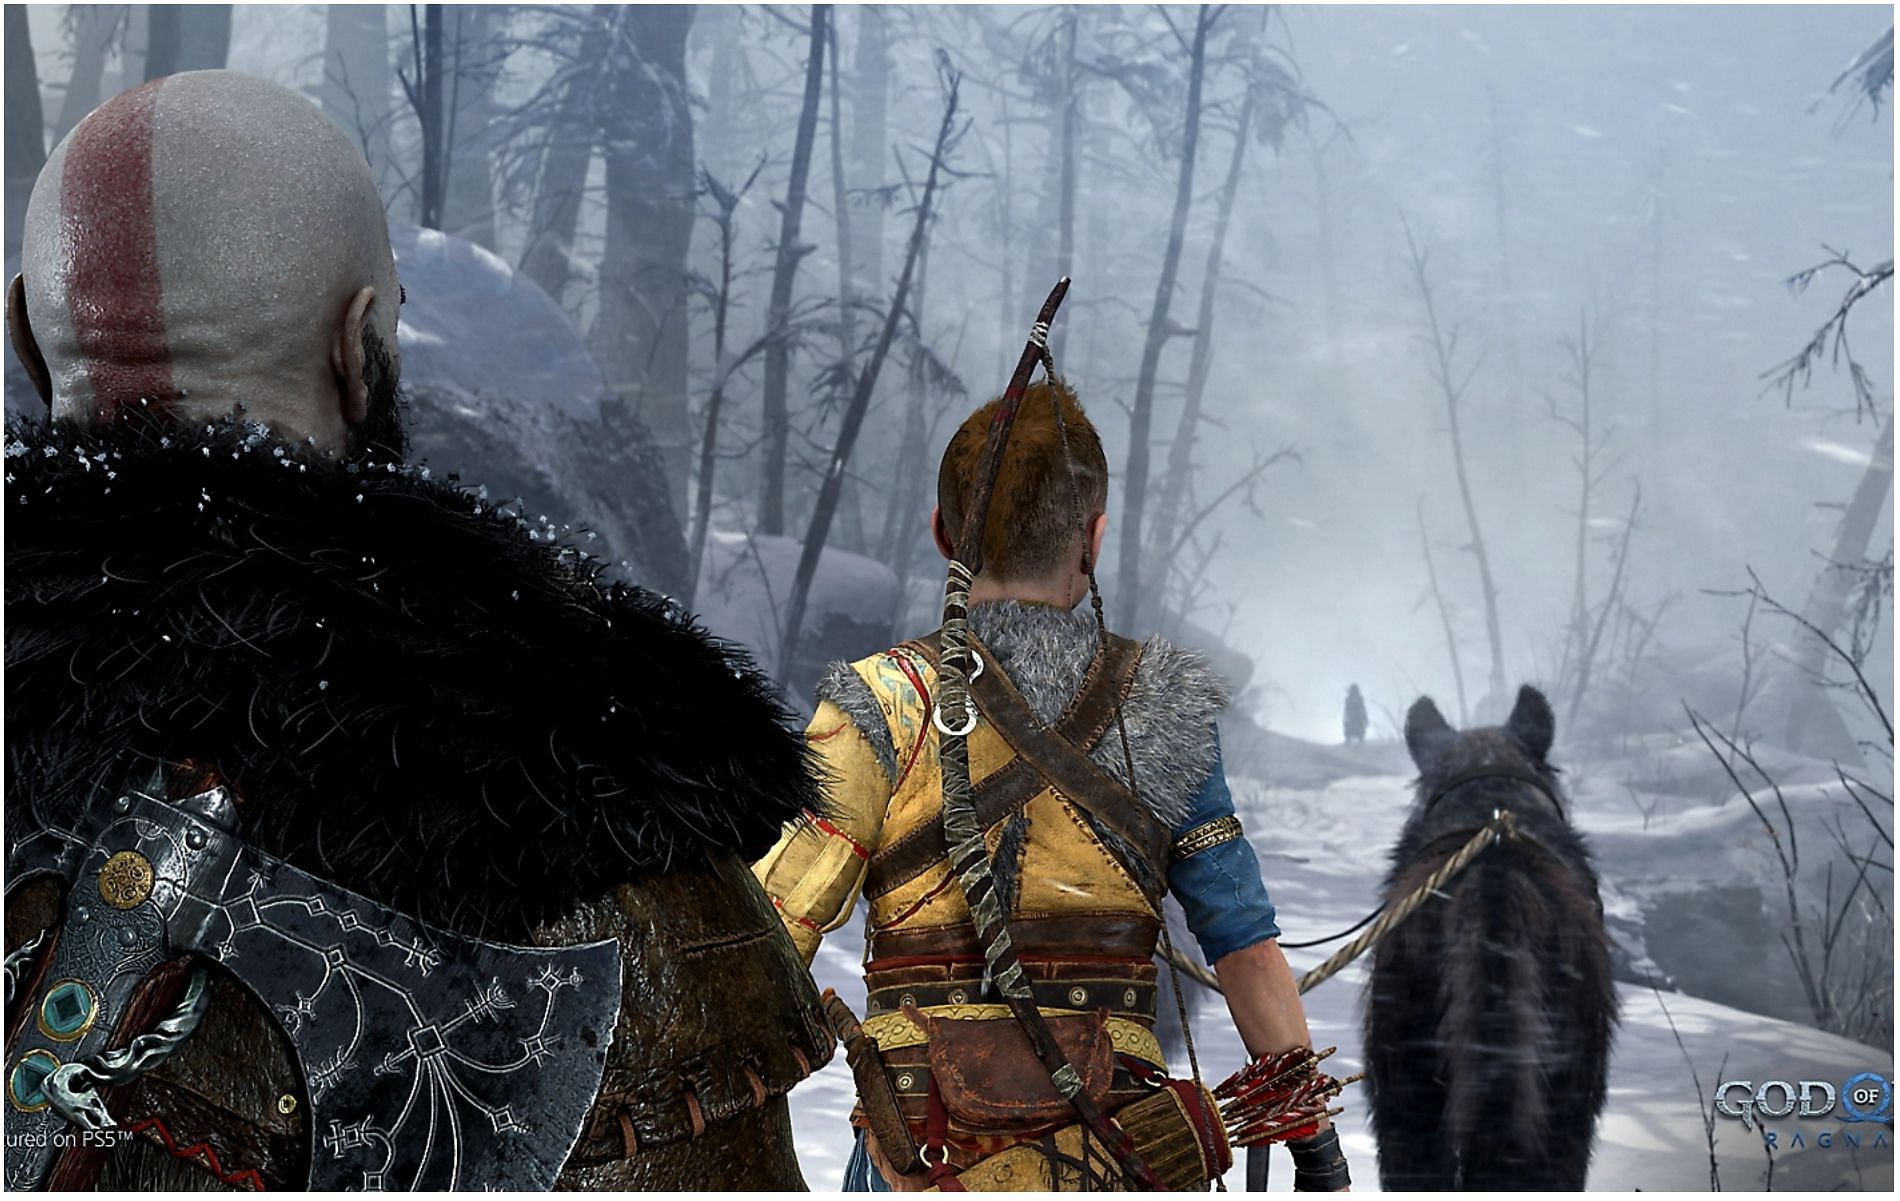 The level of excitement rises as fans speculate what will unfold during Kratos and Atreus